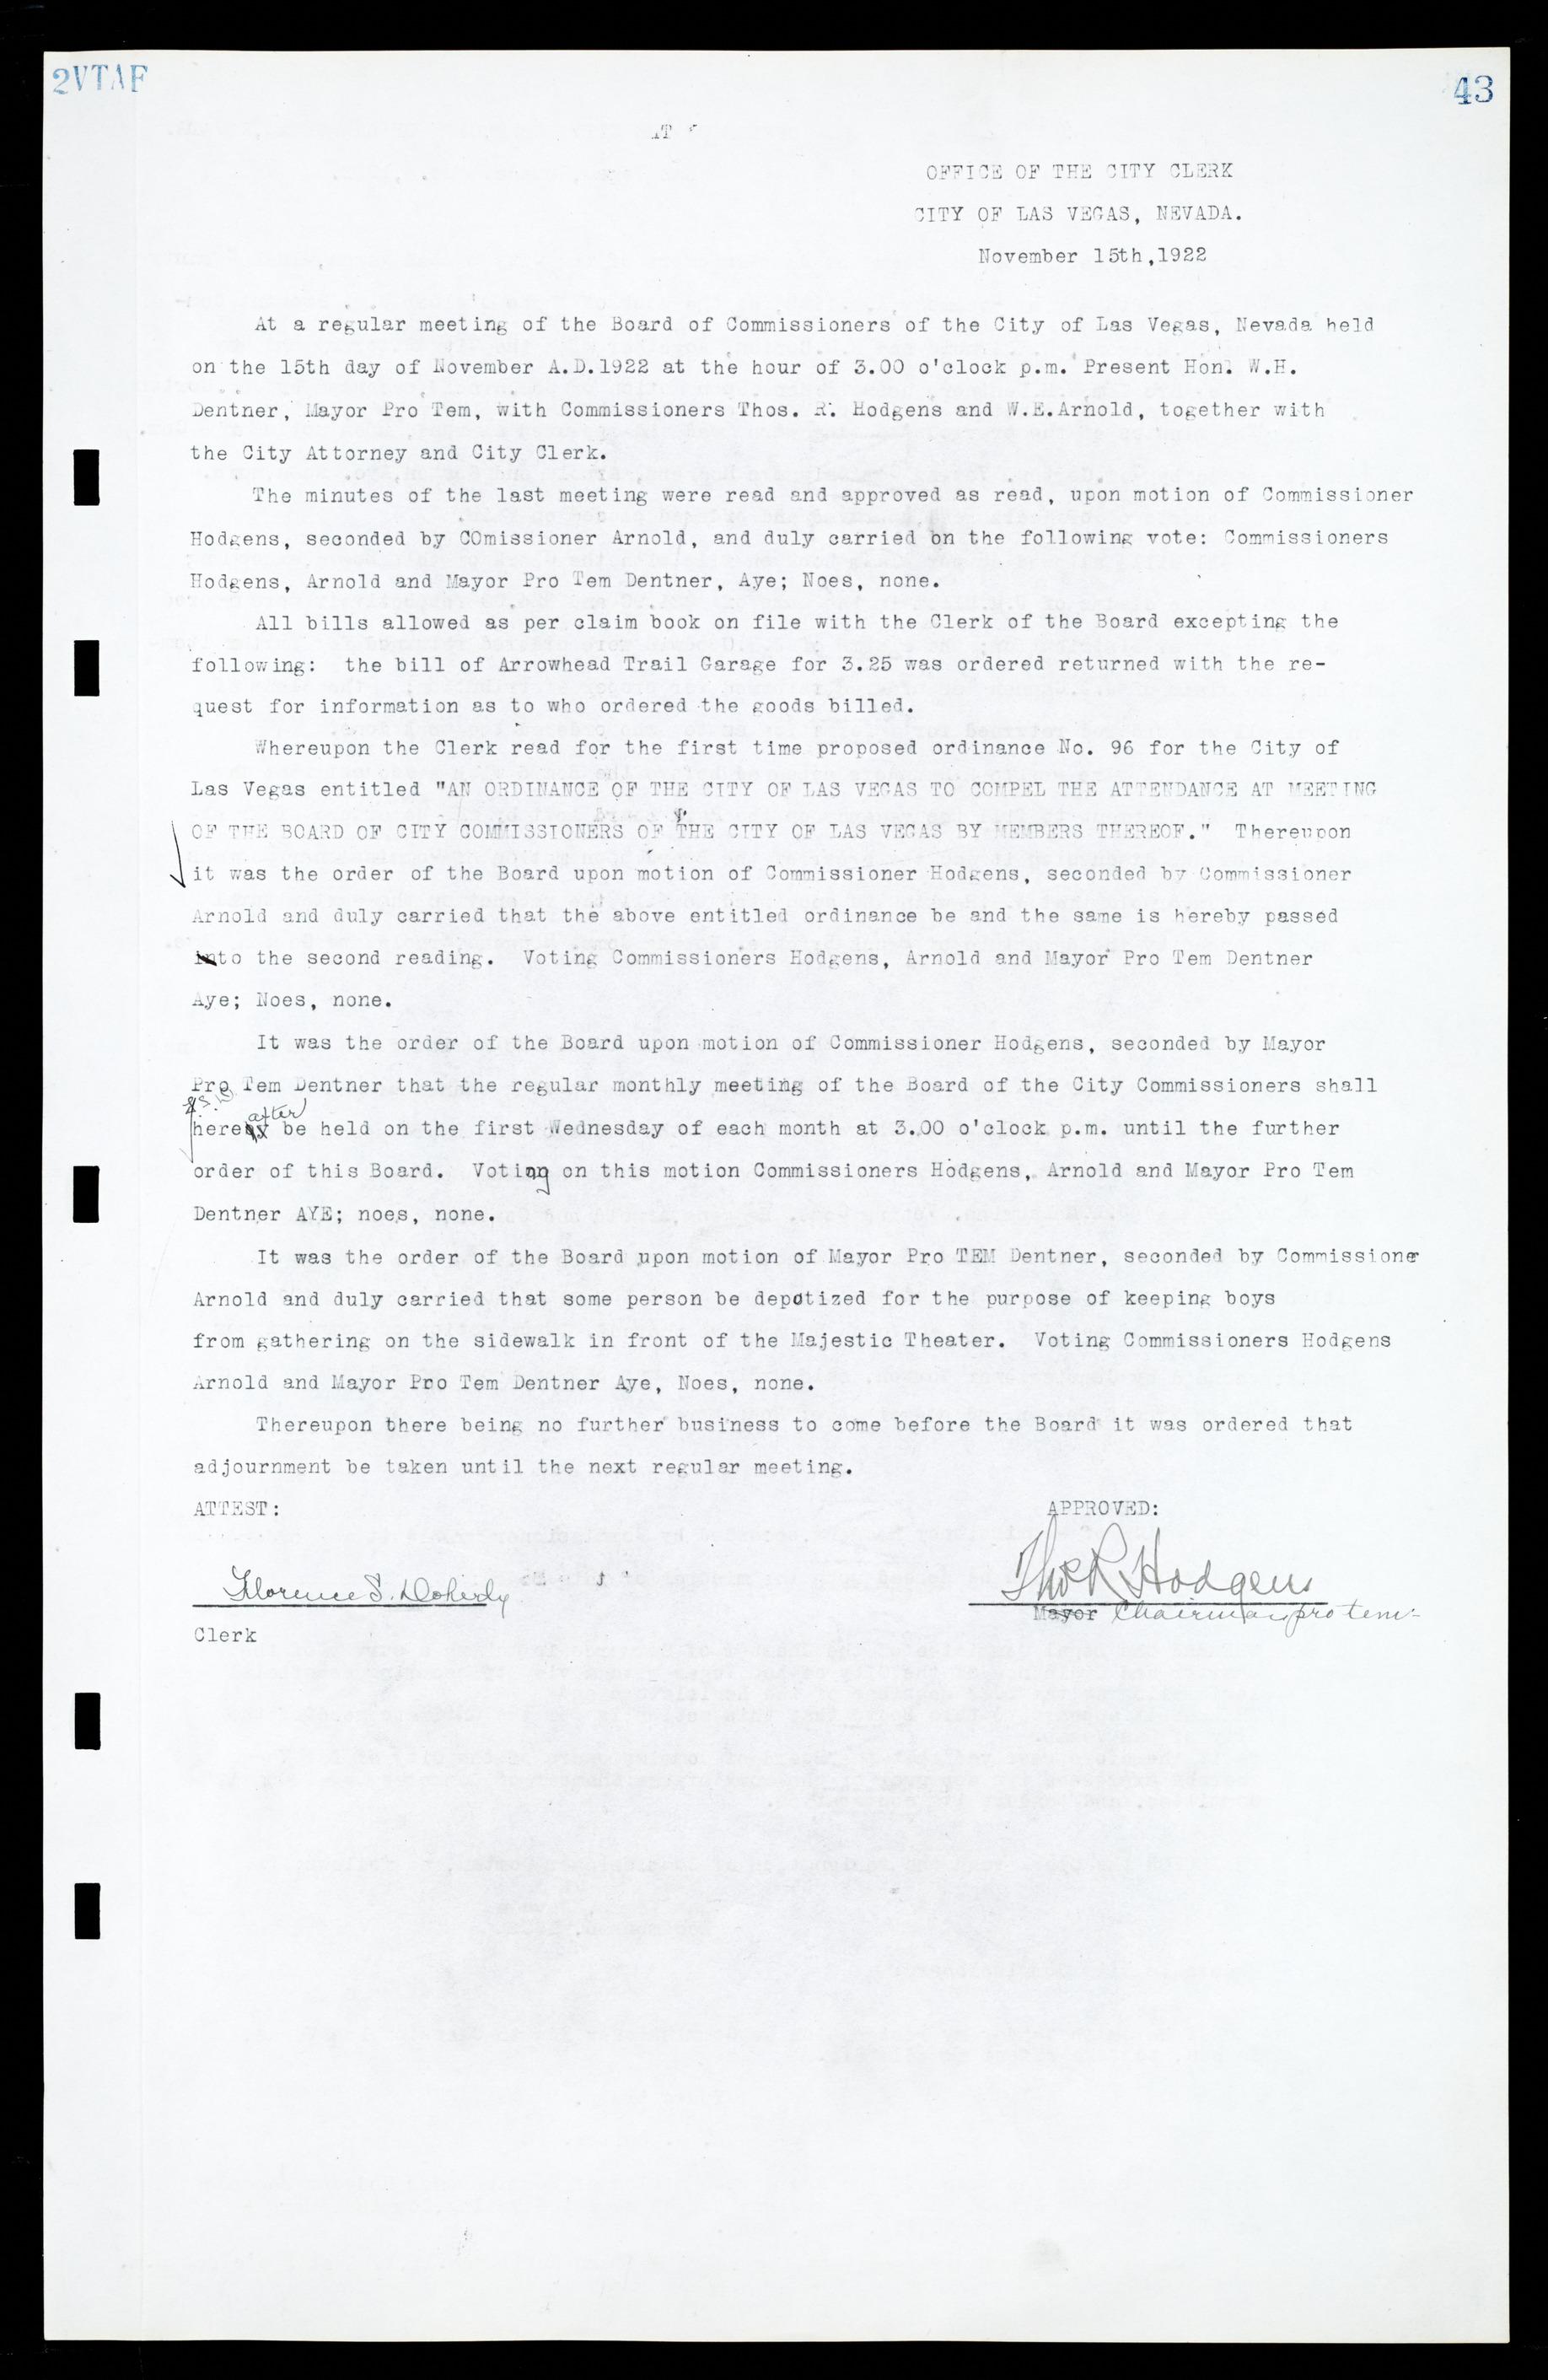 Las Vegas City Commission Minutes, March 1, 1922 to May 10, 1929, lvc000002-50